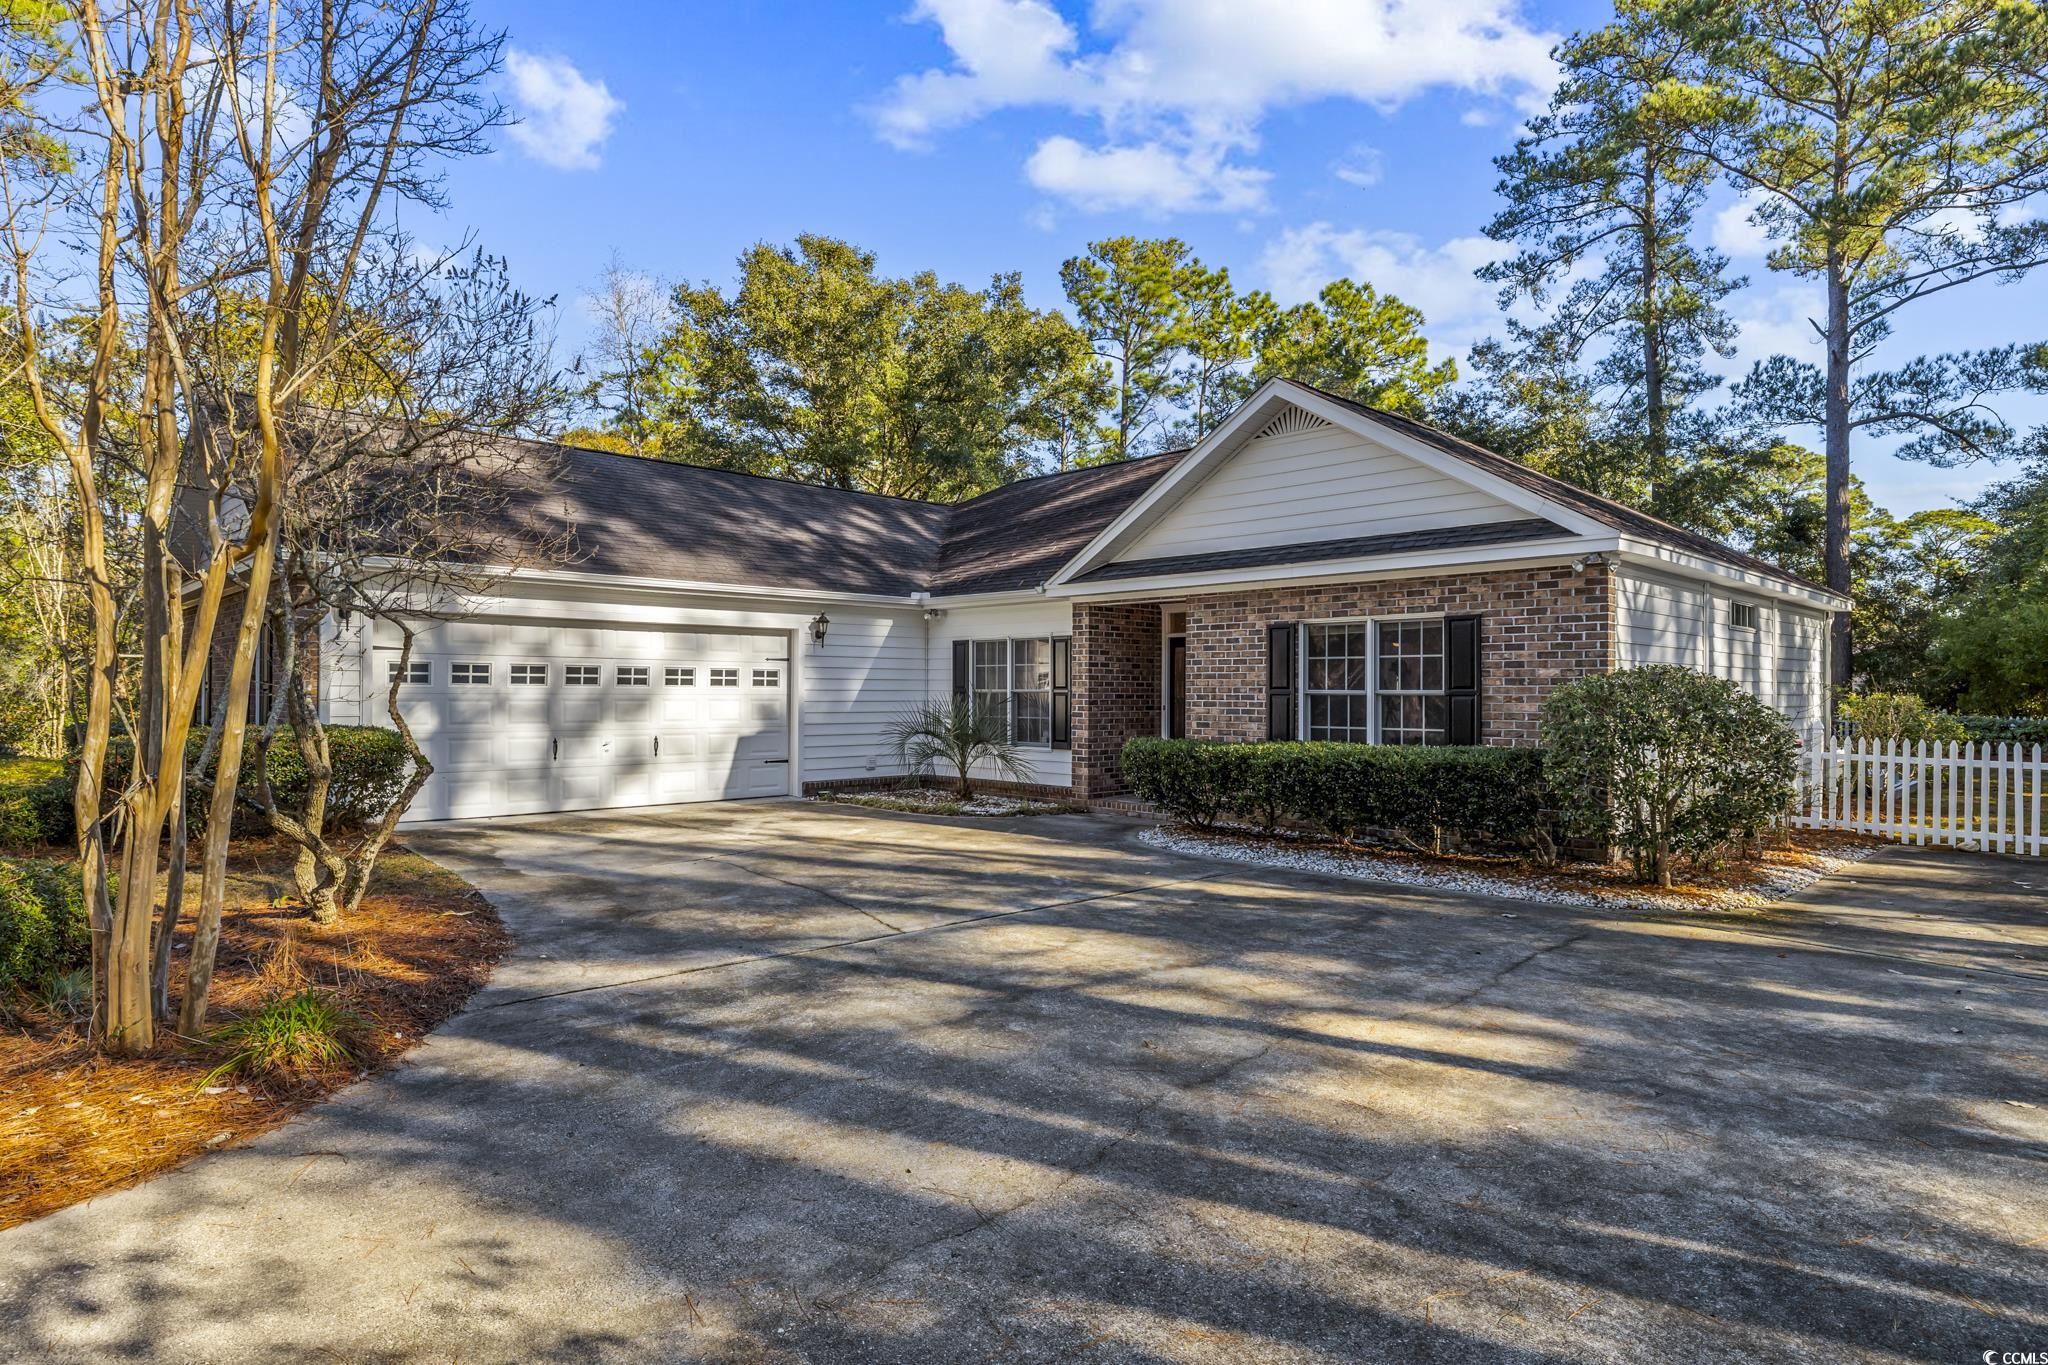 568 Kings River Rd in Hagley Estates. A highly sought after Pawleys Island address, about a mile from the Waccamaw River and public boat launch, close to the beach, True Blue, Caledonia Golf, on a wooded, fenced lot (.41 ac, Azaleas, Gardenias, Tea Olives, Hardwoods and Pines) and best of all the Hagley Estates Homeowners Association is Voluntary! This 3 bed, 2 bath home split bedroom plan is open and bright with a laid back low country charm with living areas all on one level. Kitchen and Dining Area open to the Great Room, vaulted ceilings, two lighted niches for plants or art display, built-in desk with shelves and drawers for storage, vented gas log fireplace with blower to warm you on those chilly Carolina mornings. Kitchen has a Breakfast Bar, stainless appliances, deep, double stainless sinks, solid surface tops, 36” and 42” craftsman style cabinets, adjacent to the 10 x 6 Utility Area (shelving, cabinets and hidden storage for small appliances). From the Great Room you enter the 22 x 13 Carolina Room through double 15-Lite French Doors, featuring four windows open to the back yard and sliding doors on each end that flank open decks (14 x 14 and 14 x 21) with built-in seating, perfect for entertaining guests. Luxurious Owner Suite with Tray Ceiling, crown and access to the 14x21 open deck, double walk-in closets, Master Bath with Whirlpool Tub, custom tile shower with glass tile accent, storage/linen closet, double vanity with solid surface tops and comfort height commodes in both baths. On the opposite side of the home you’ll find 2 Guest Bedrooms (14 x 12 and 14 x 13, remote controlled fans, crown) and shared Guest Bath with upgraded vanity, tub shower combo with transom for natural light. Wait, there’s more. In the backyard there are two detached storage buildings (12 x 8, 10 x 7) offering many possibilities. There is no need to buy bottled water anymore, there is a whole house water filtration system located in one of the Guest Bedroom closets. You’ll be glad to have backup electricity with your Generac Generator powered by two 100 gallon above ground propane tanks (rental). Also, there’s a buried 120 gallon propane tank on the opposite side of the property. And just in case you’re wondering, the answer is YES, there is room for a pool. Courtyard entry 550 square foot garage provides enough room for two larger vehicles. The driveway extension allots room for boat parking. Brick and vinyl low maintenance exterior. New heating and air installed 2021. (Images depicting furniture are virtually staged and are for demonstration purposes only)